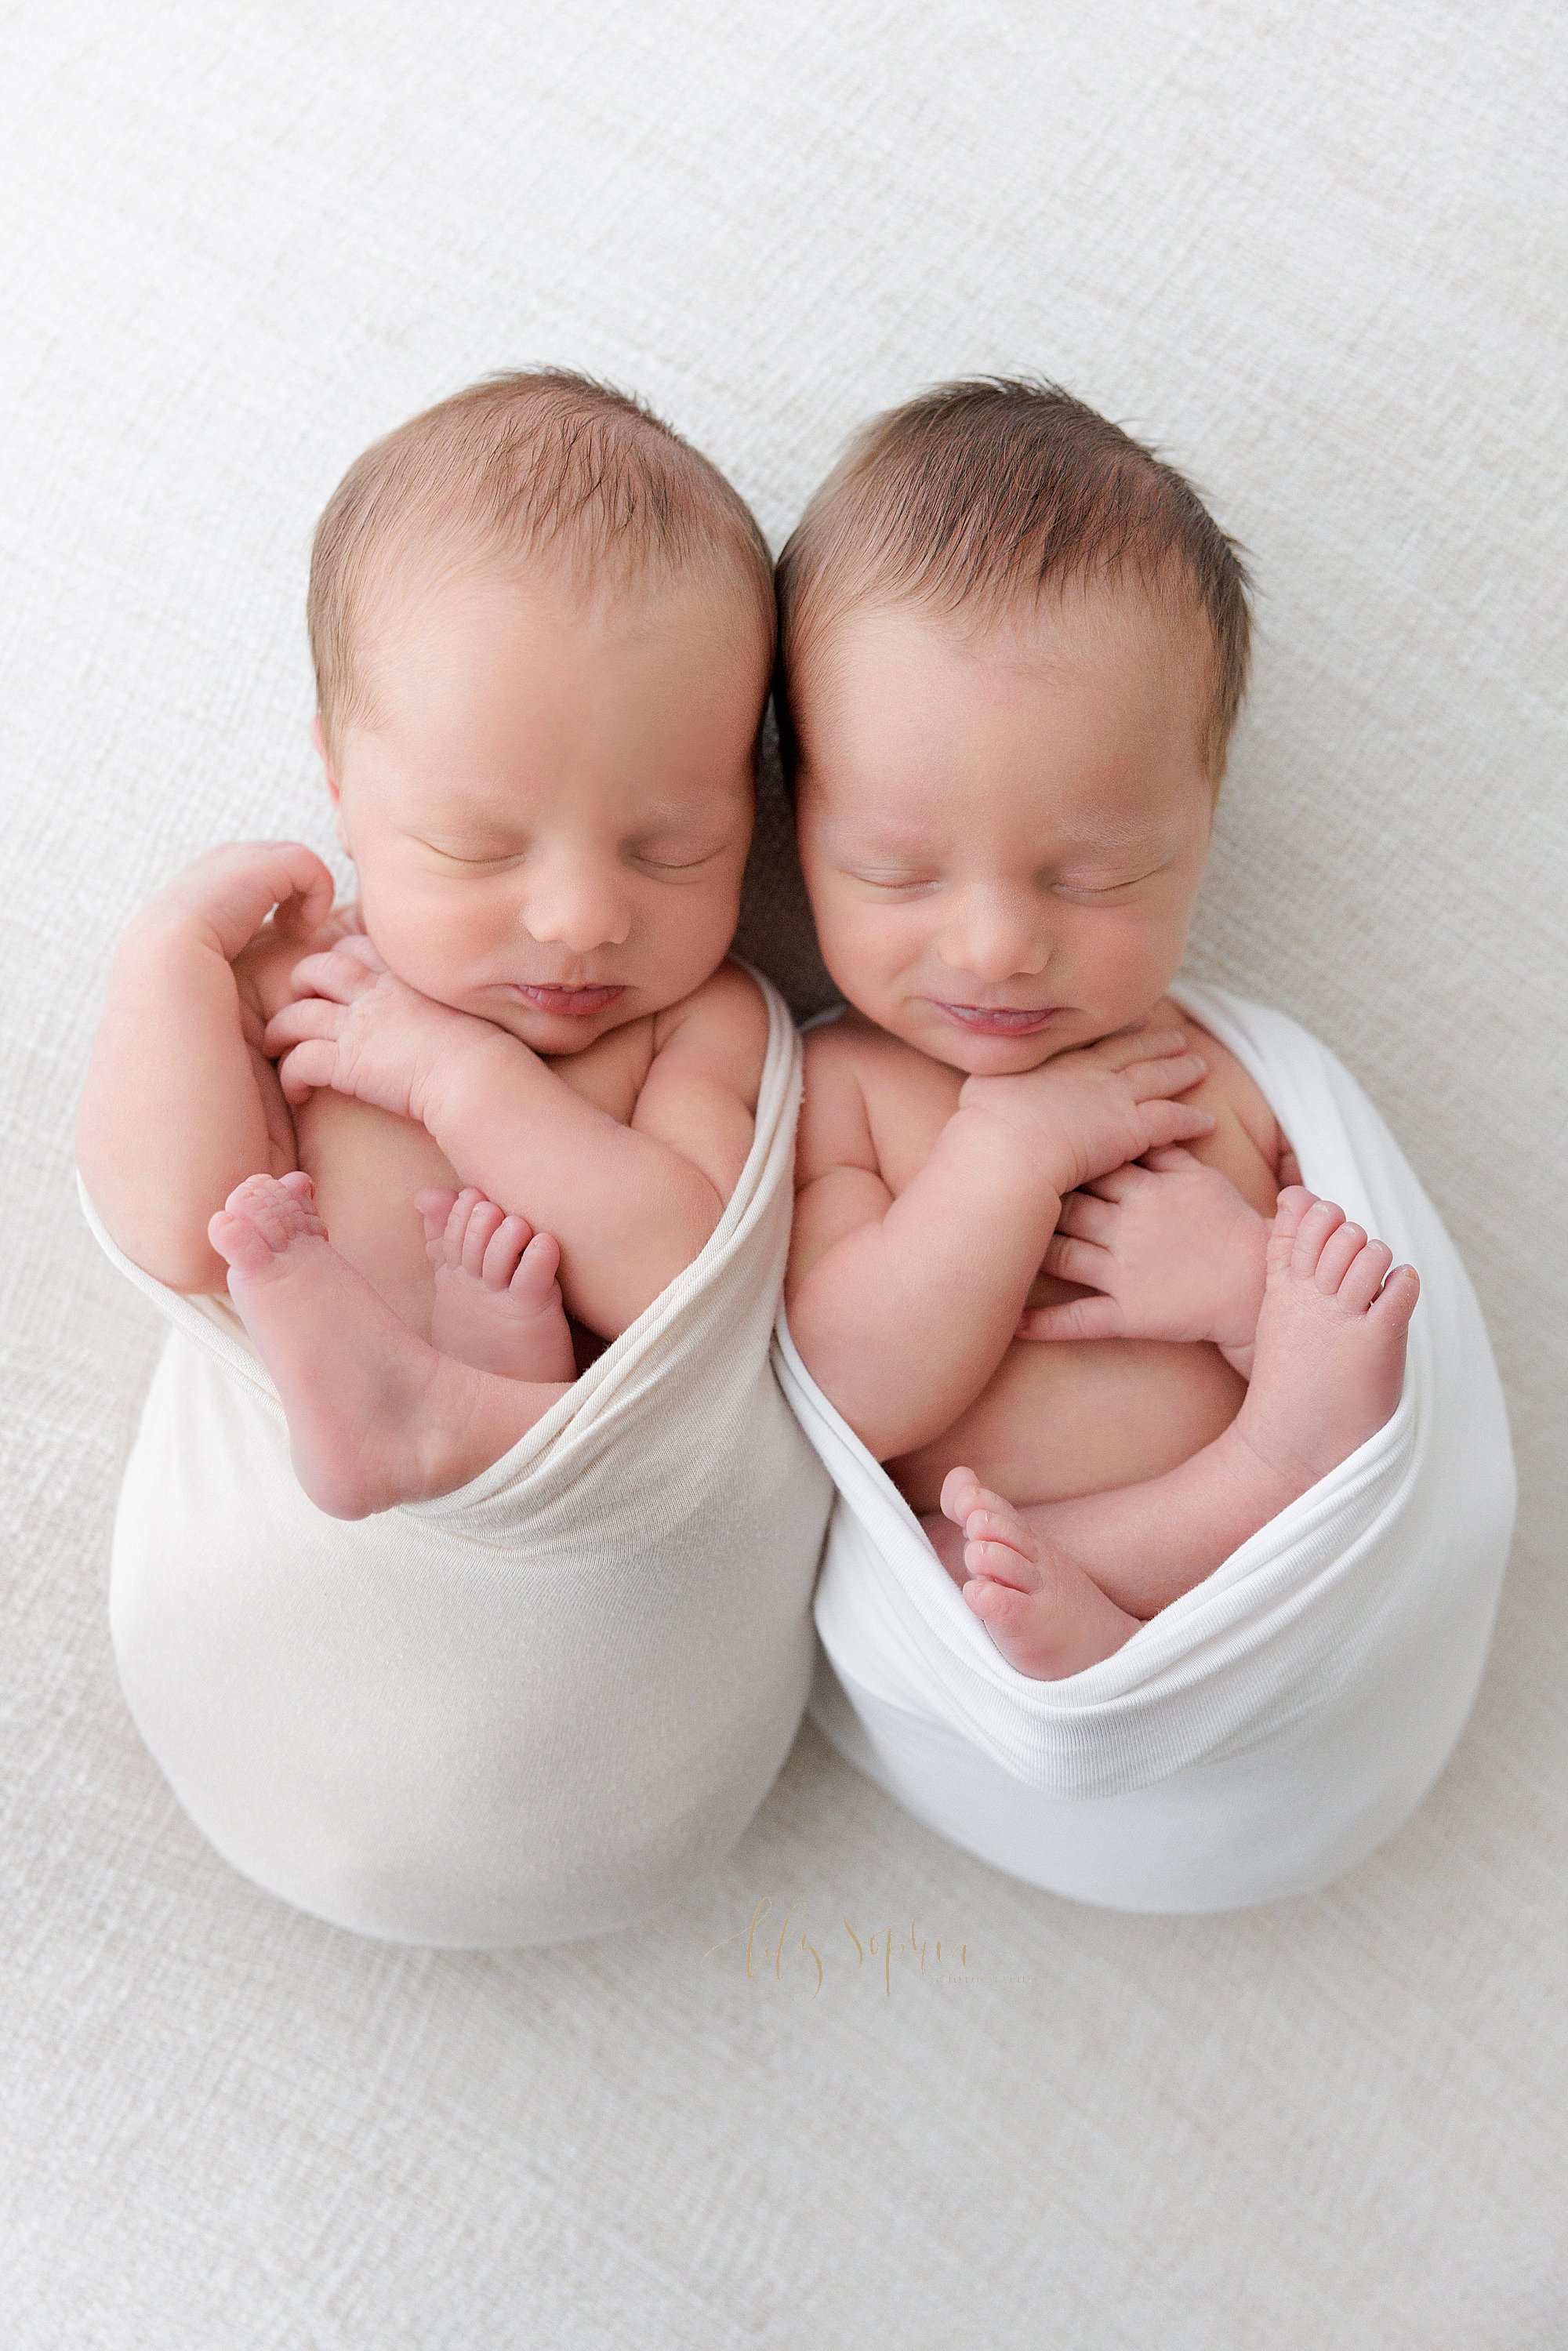  Newborn portrait of identical twin newborn baby boys as they lie side by side cradled in stretchy swaddles in a photography studio near Cumming in Atlanta Georgia that uses natural light. 